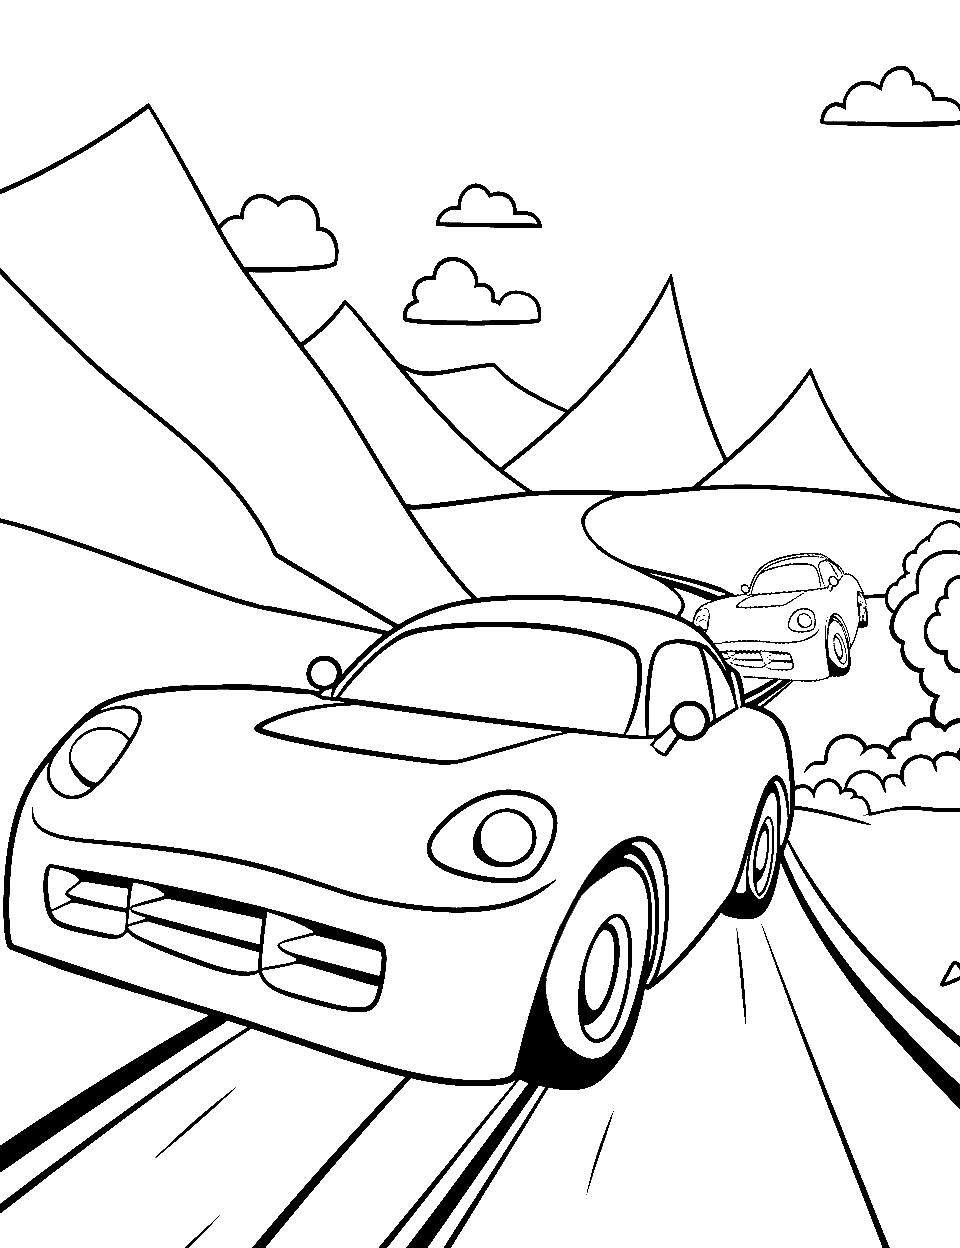 Toy Cars Highway Coloring Page - A winding road with cars zooming along.